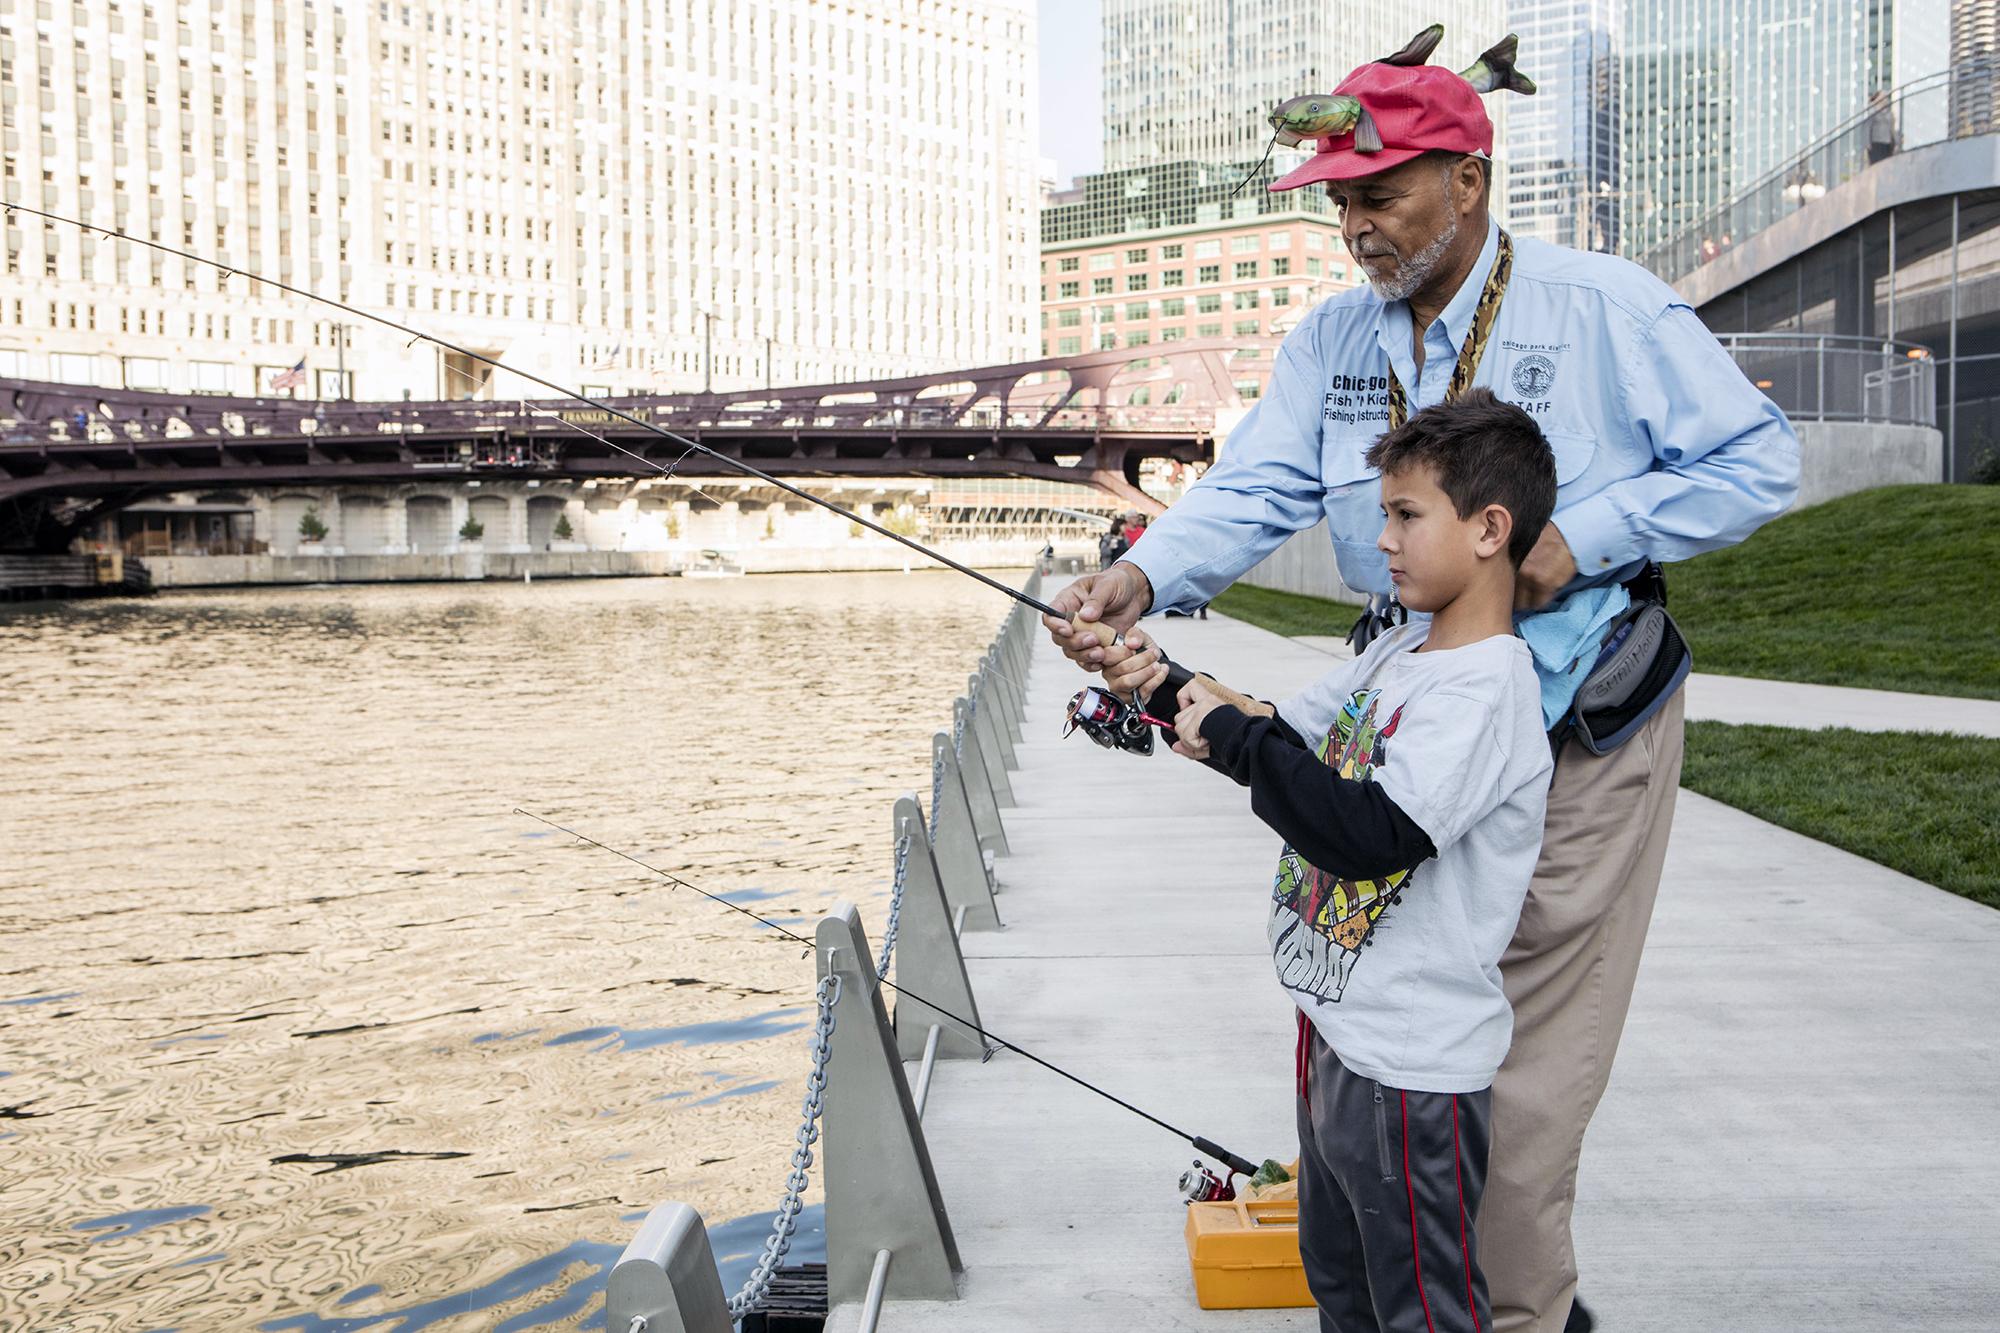 A young angler gets help from a Chicago Park District fishing instructor during #ChicagoFishes event Oct. 13. (© Shedd Aquarium)